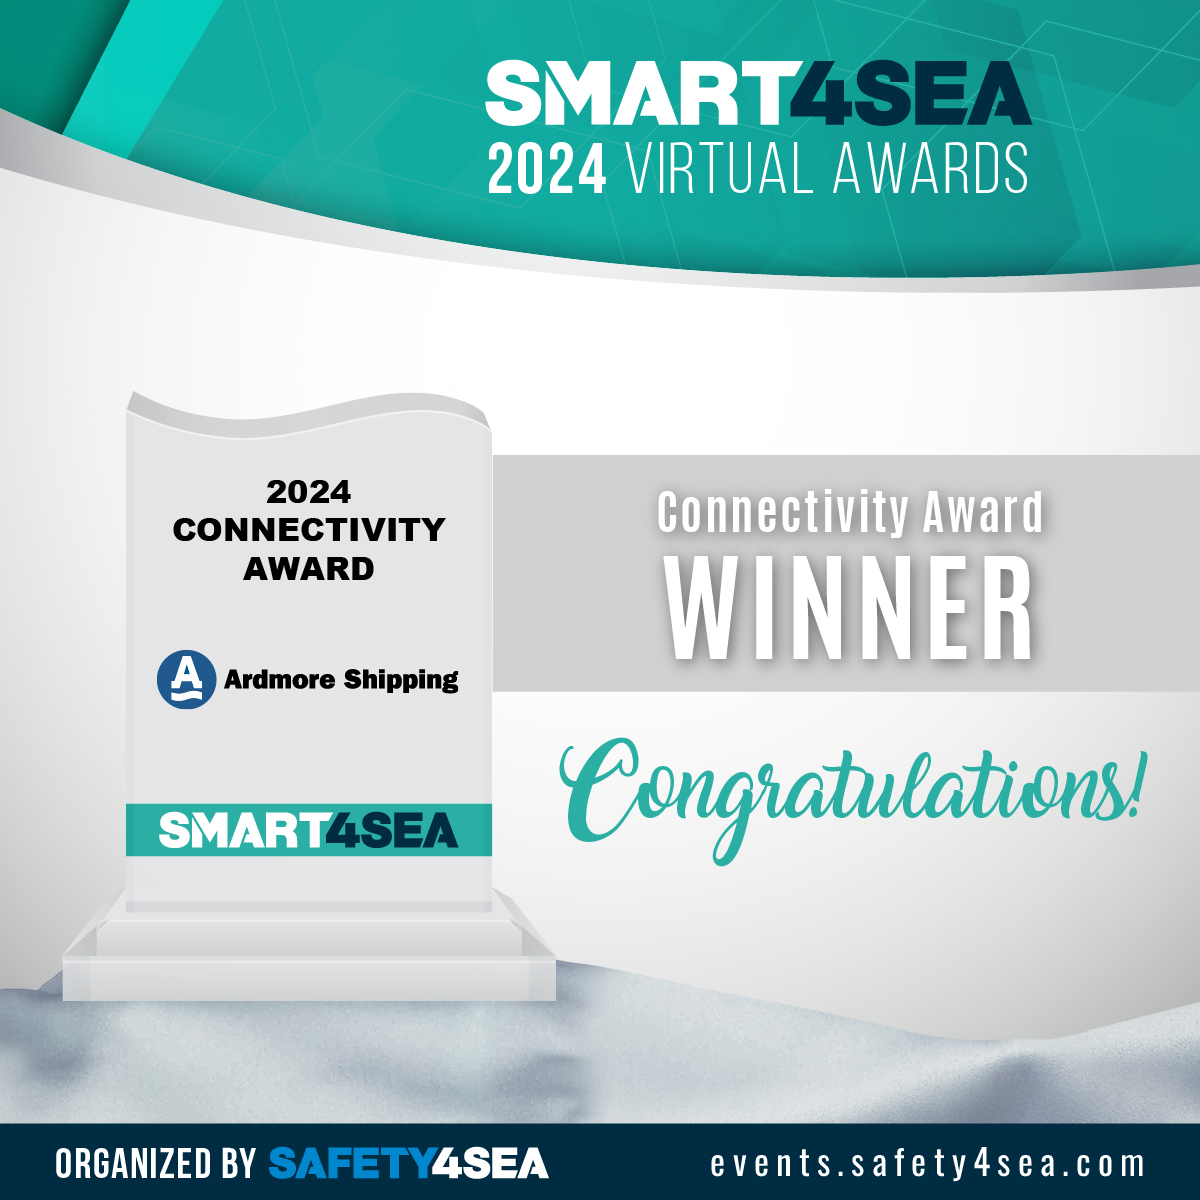 .@ArdmoreShipping  received the 2024 #SMART4SEA Connectivity Award for its 'Ardmore Crew's Got Talent' program that aims to foster #connectivity among crew members.

Congratulations 🎉👏

Capt. Yadu Bassi, Marine Personnel Manager, Ardmore Shipping, accepted the award.